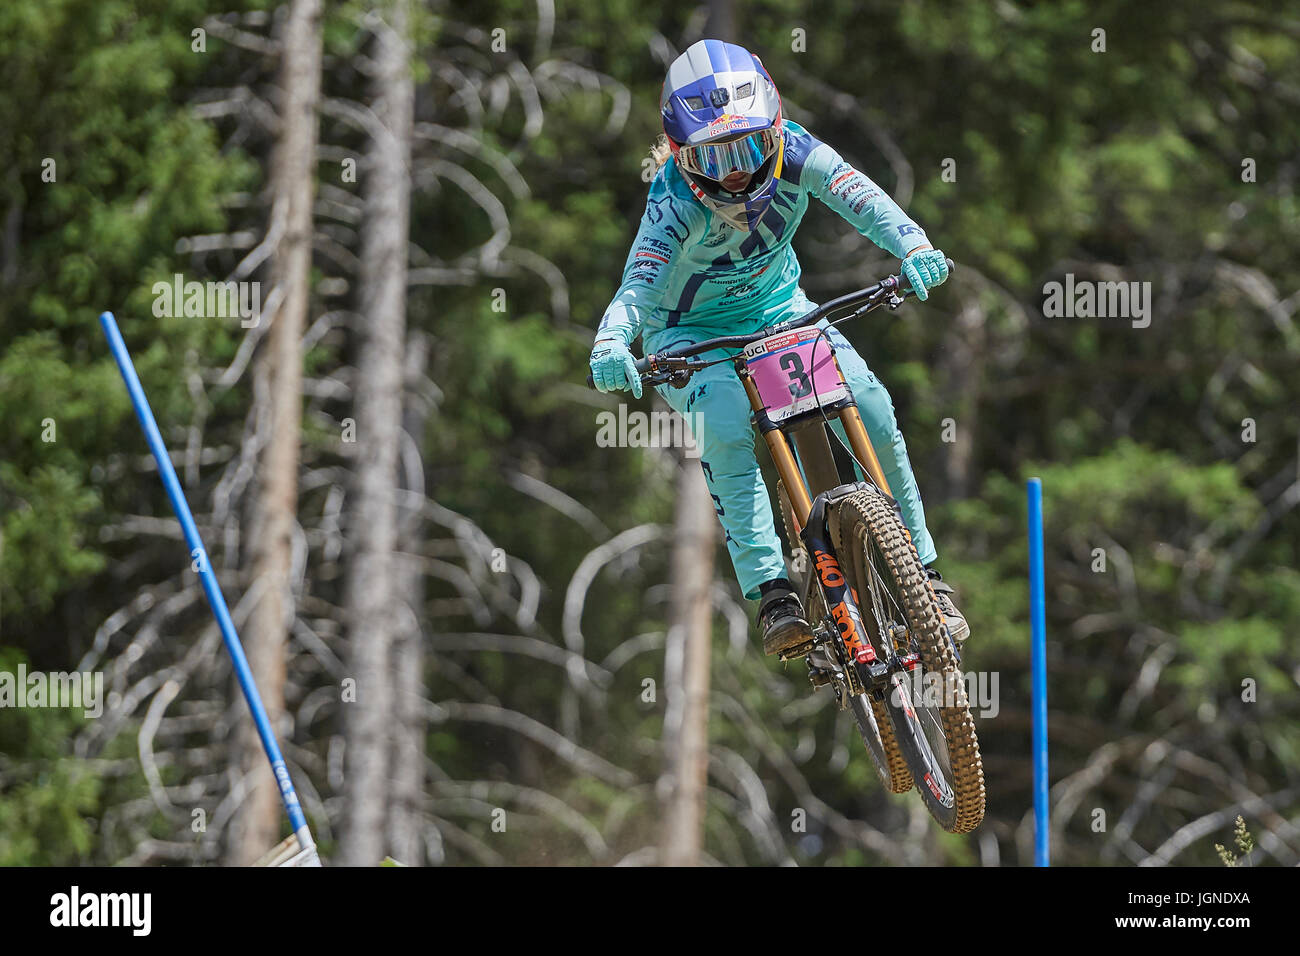 Lenzerheide, Switzerland. 8 July 2017. Tahnee Seagrave from TRANSITION BIKES/FMD  FACTORY RACING during the UCI Mountain Bike Downhill Worldcup in  Lenzerheide. © Rolf Simeon/bildgebend.ch/Alamy Live News Stock Photo - Alamy